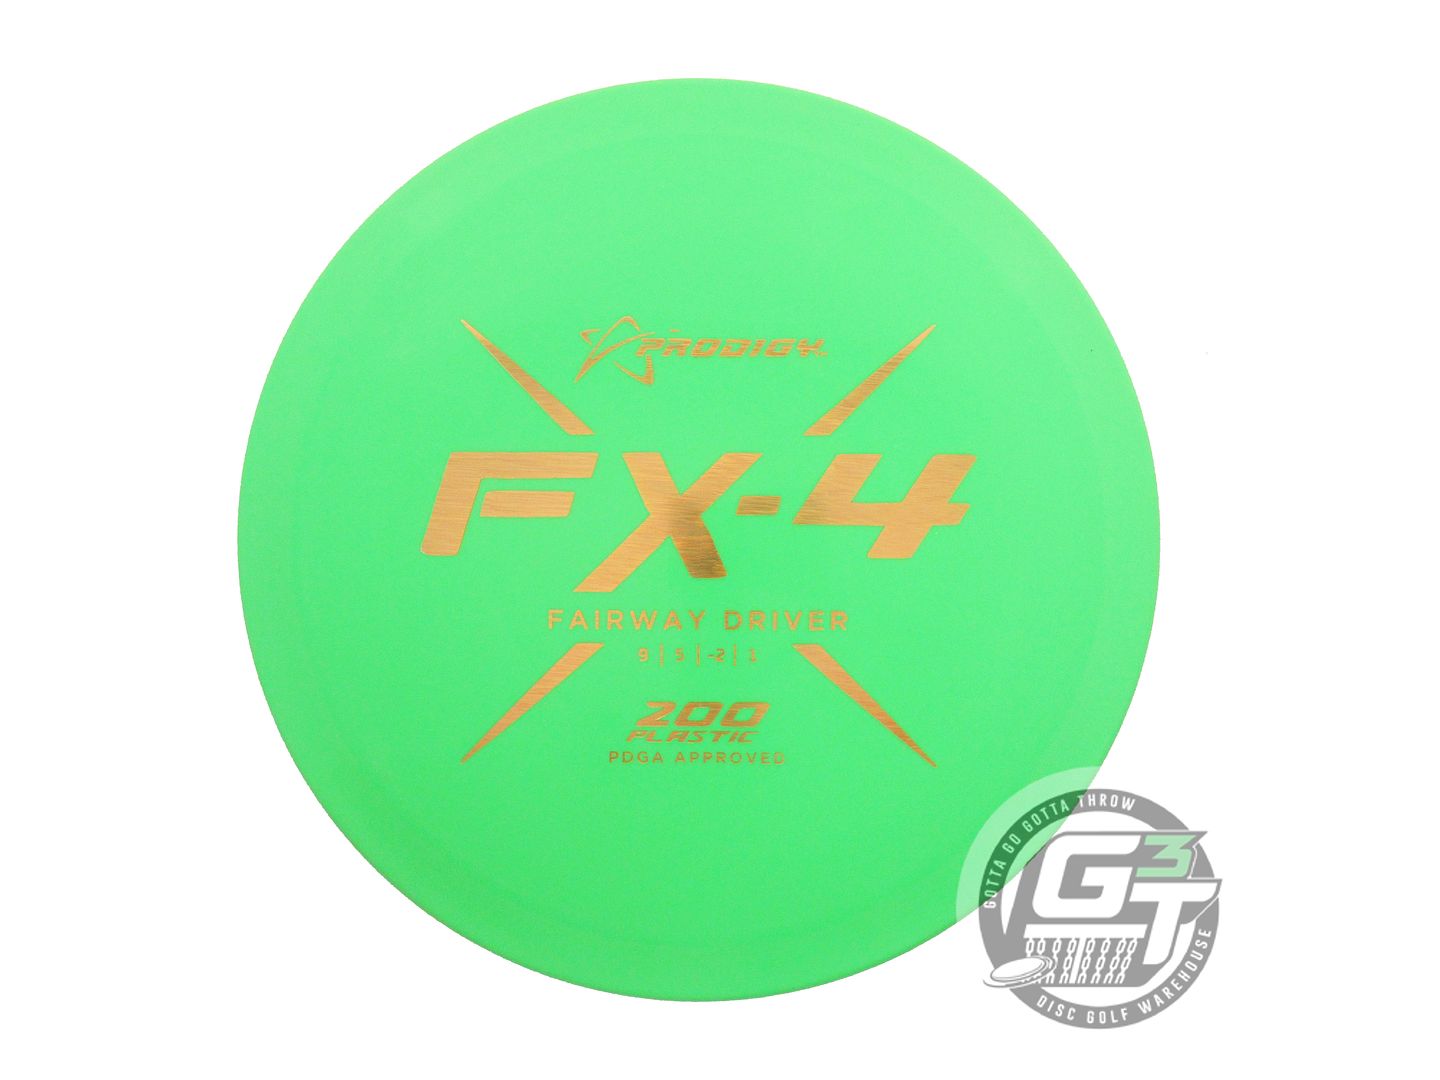 Prodigy 200 Series FX4 Fairway Driver Golf Disc (Individually Listed)